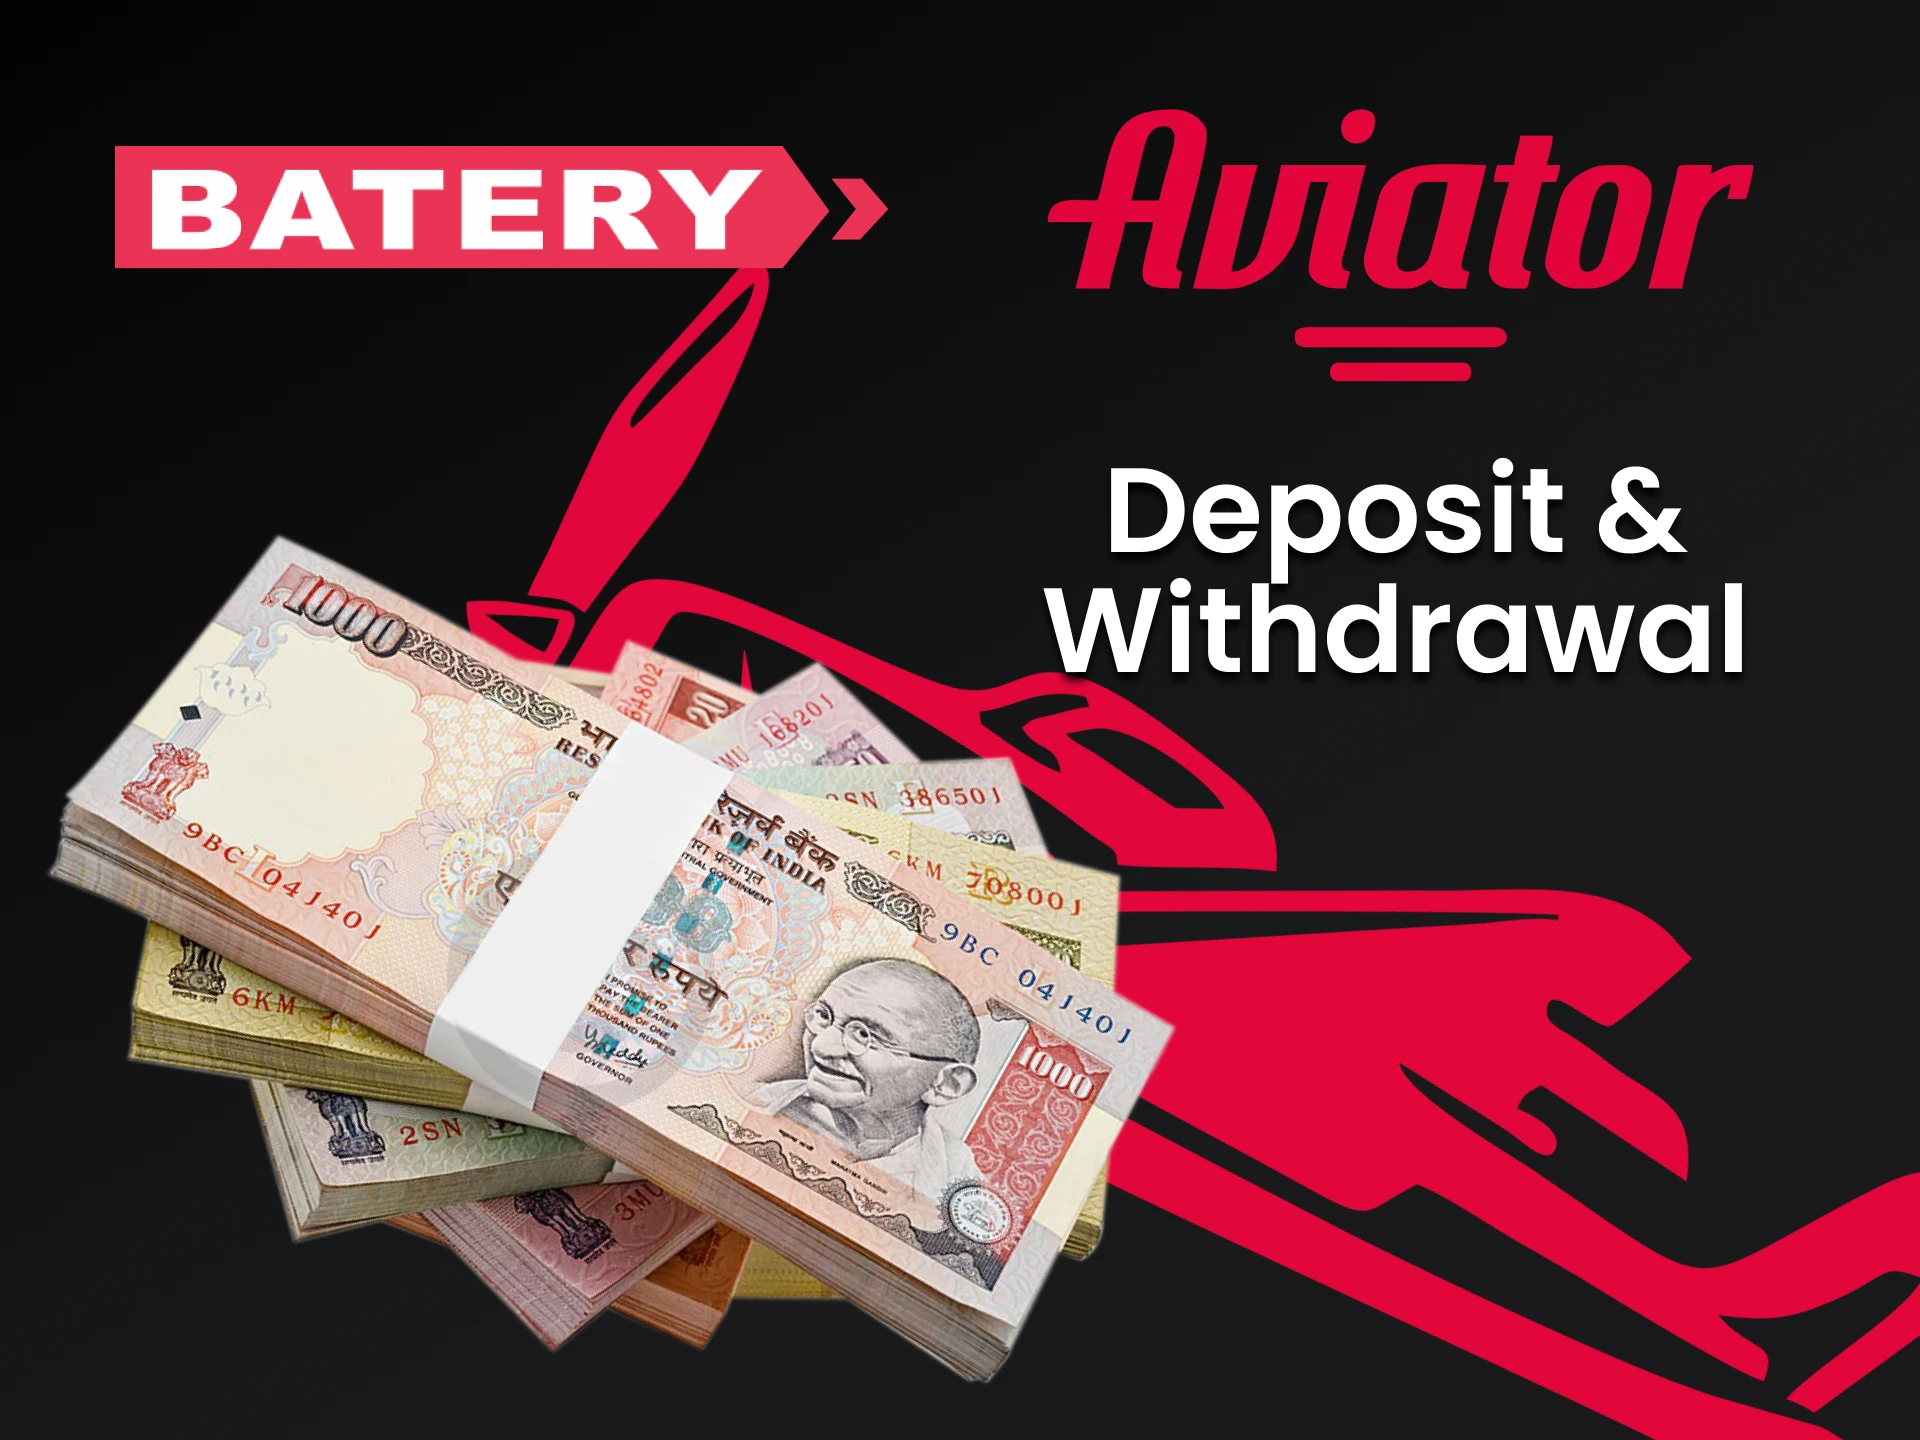 Use the convenient transaction method from Batery for Aviator.